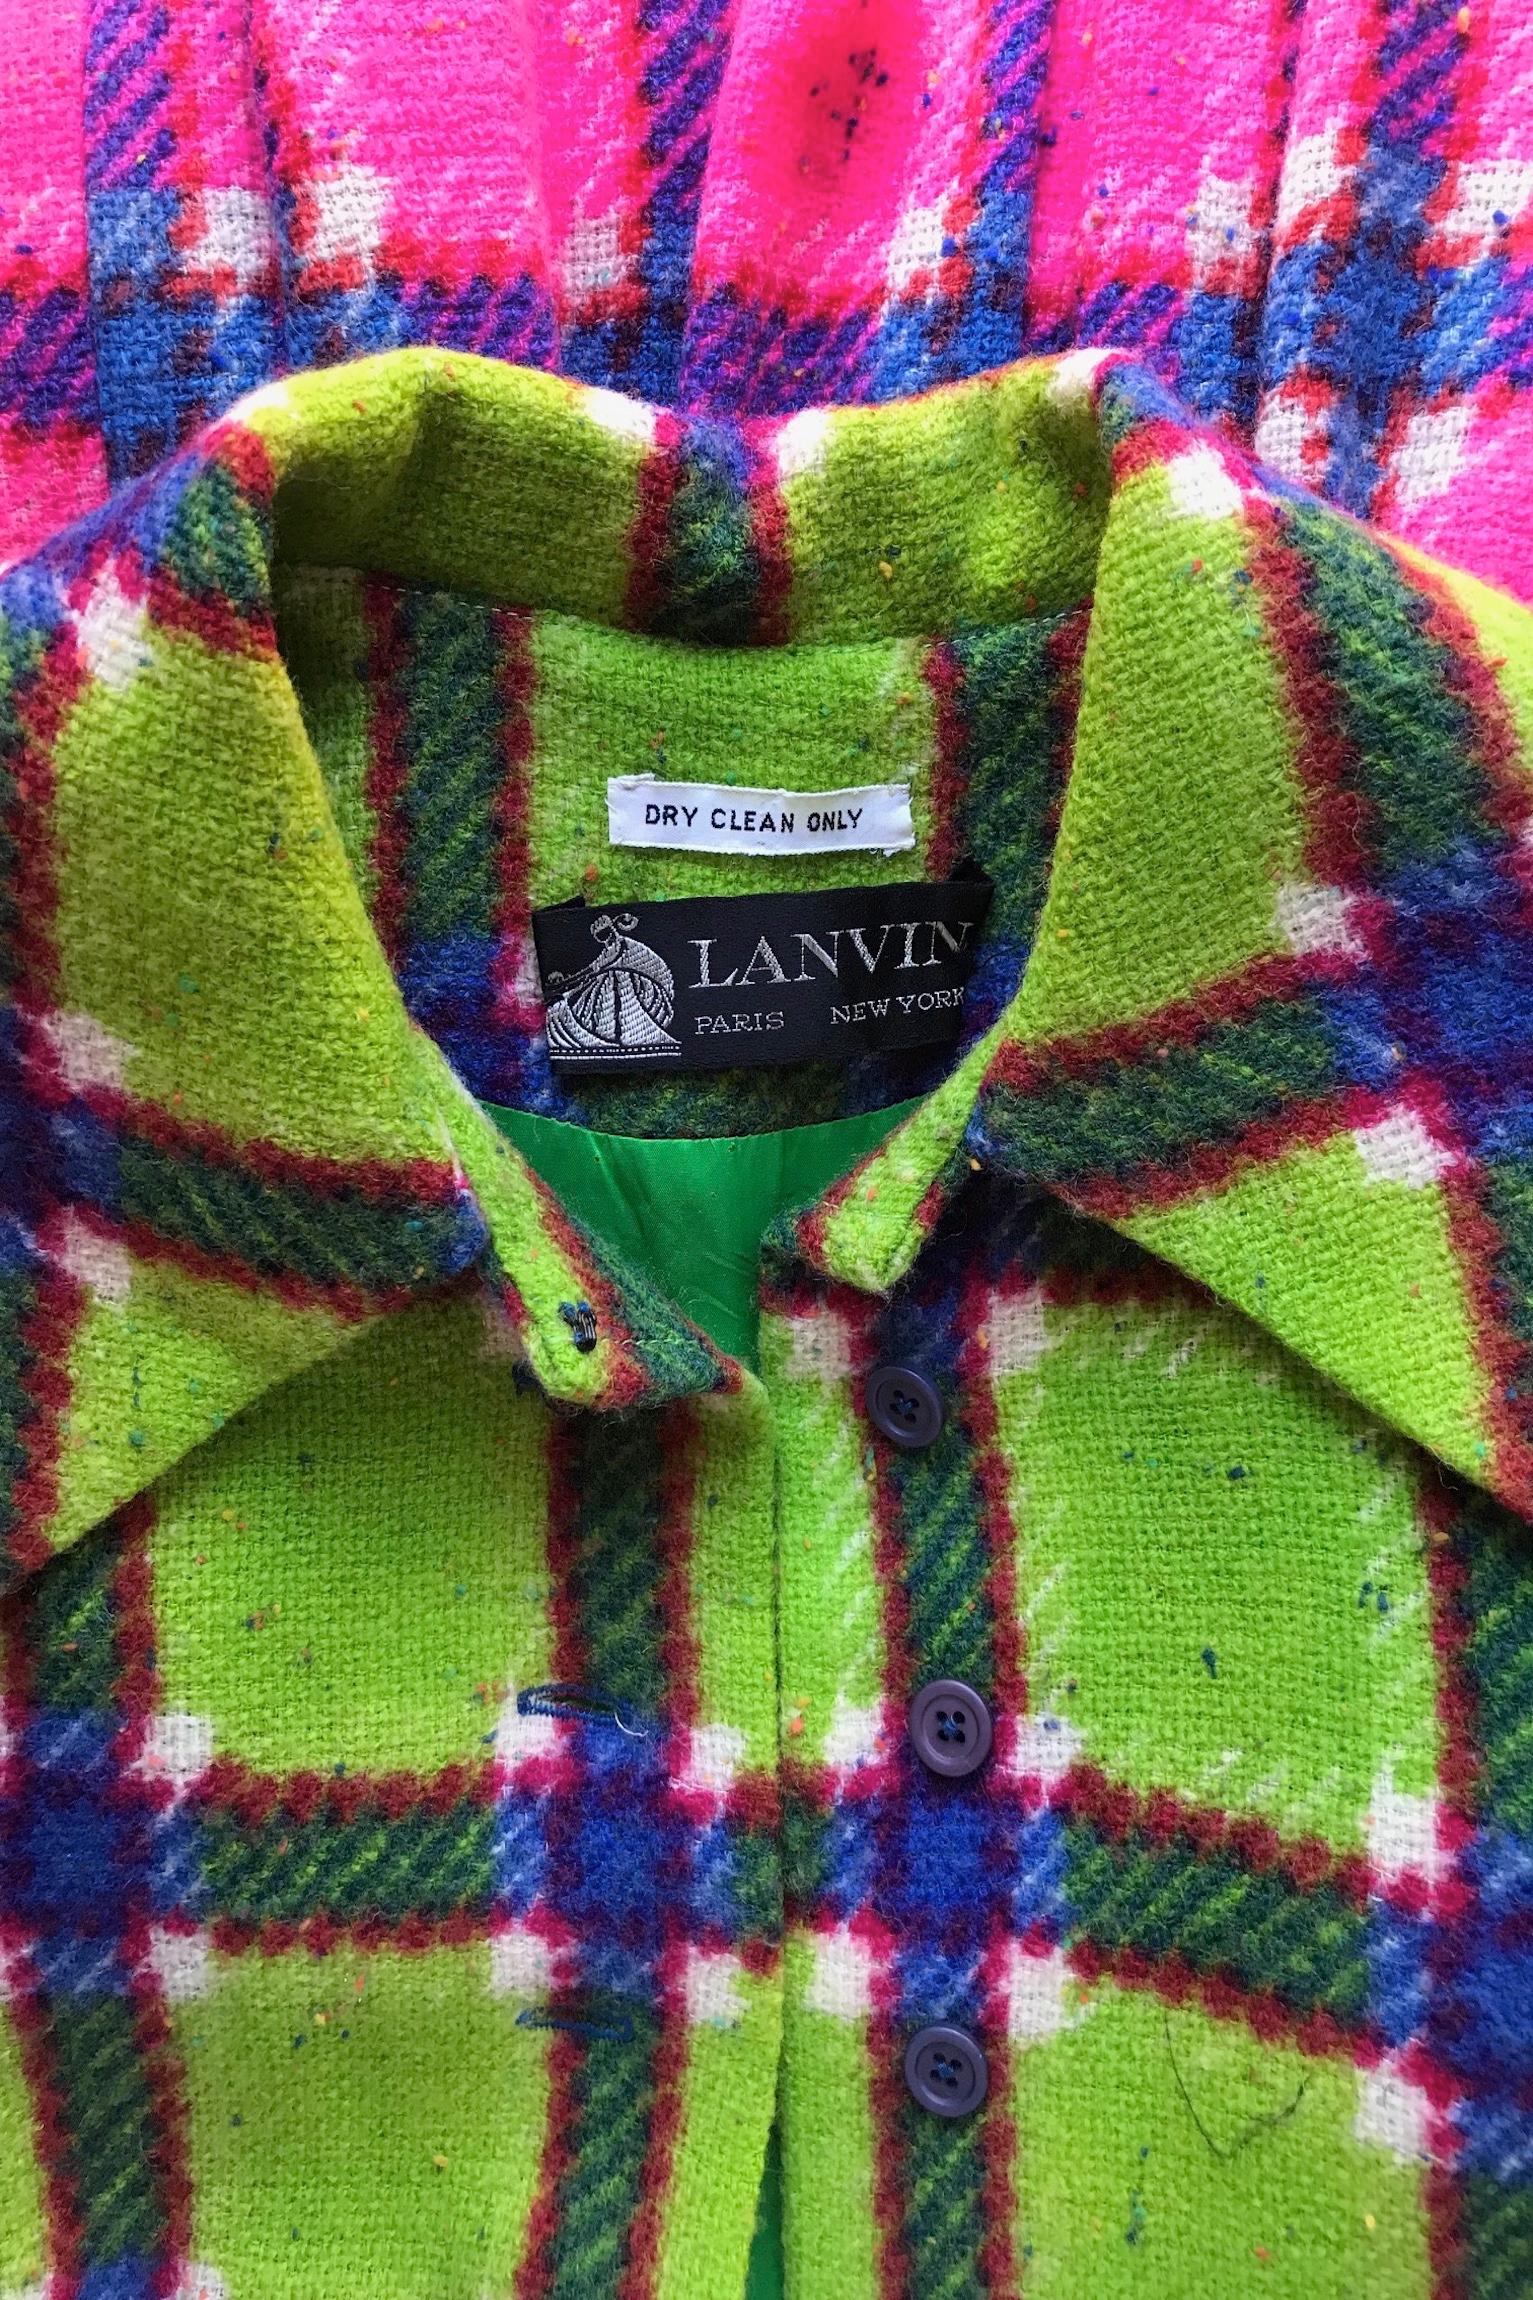 A colorful 1970s Lanvin bright pink and lime green tartan wool coat dress consisting of a fitted top and floor-length skirt. The dress has a full front button closure and a matching slim waist-belt. The bold tartan is completed with blue and white